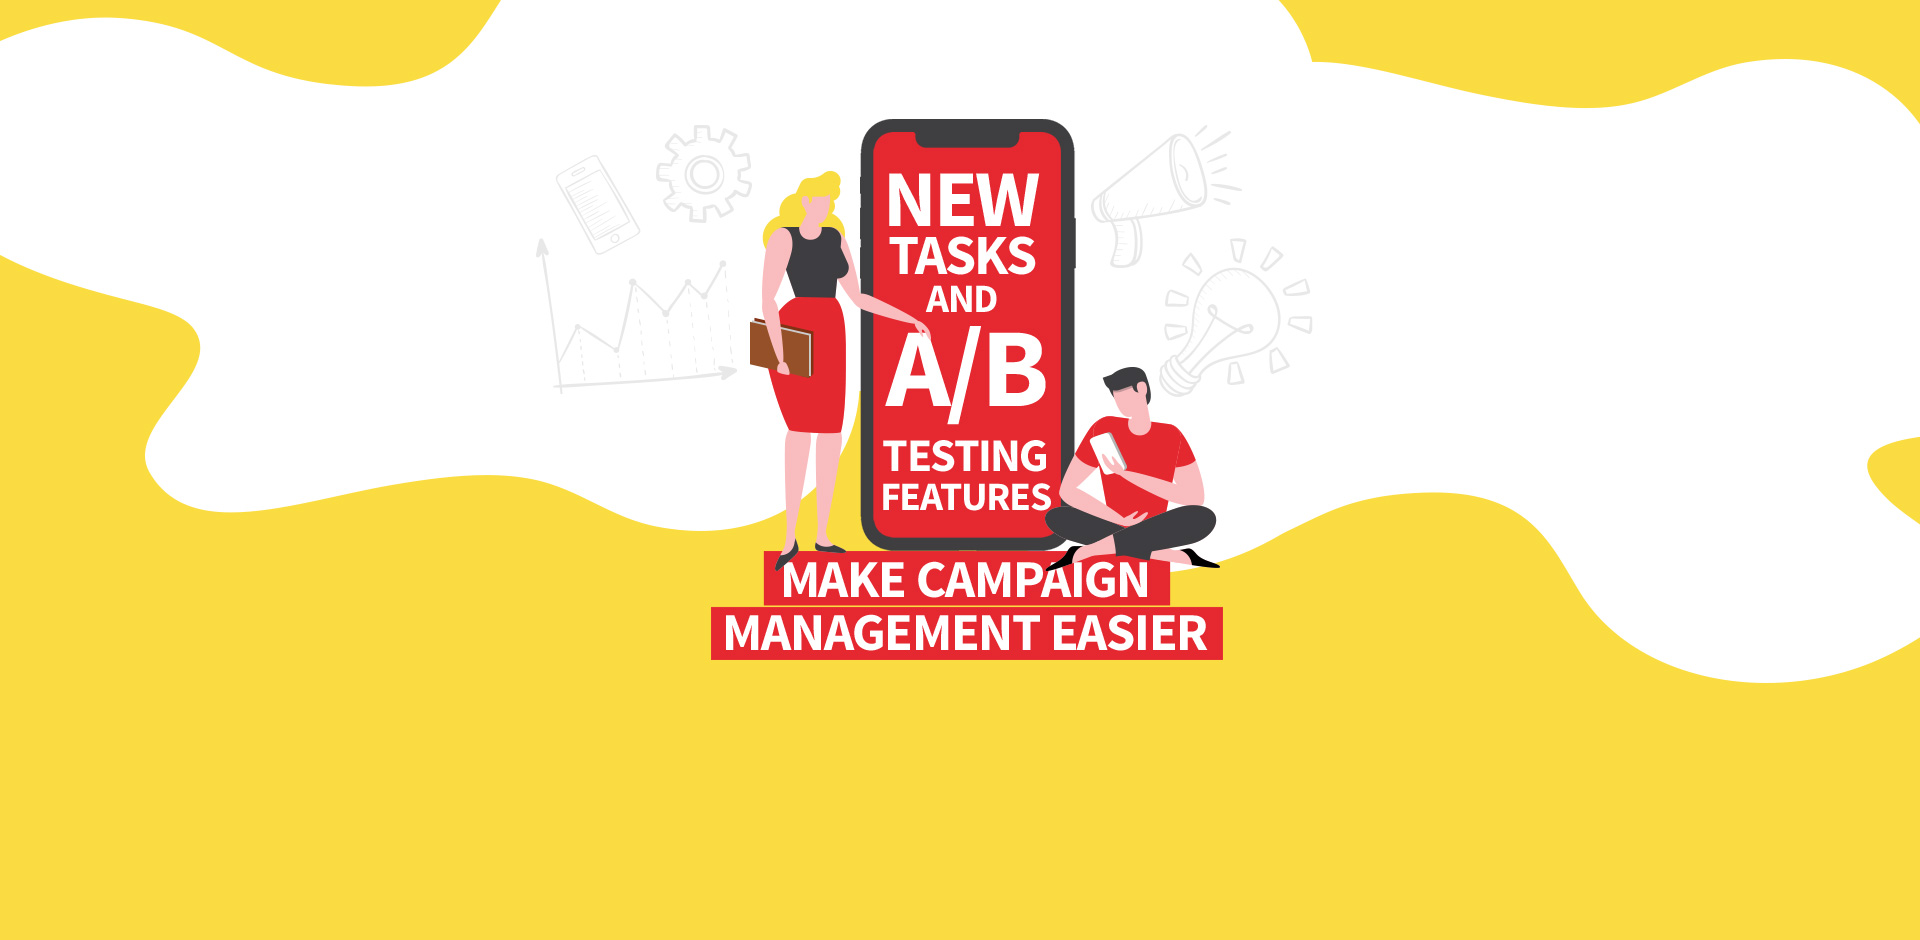 New Tasks and A|B Testing Features Make Campaign Management Easier